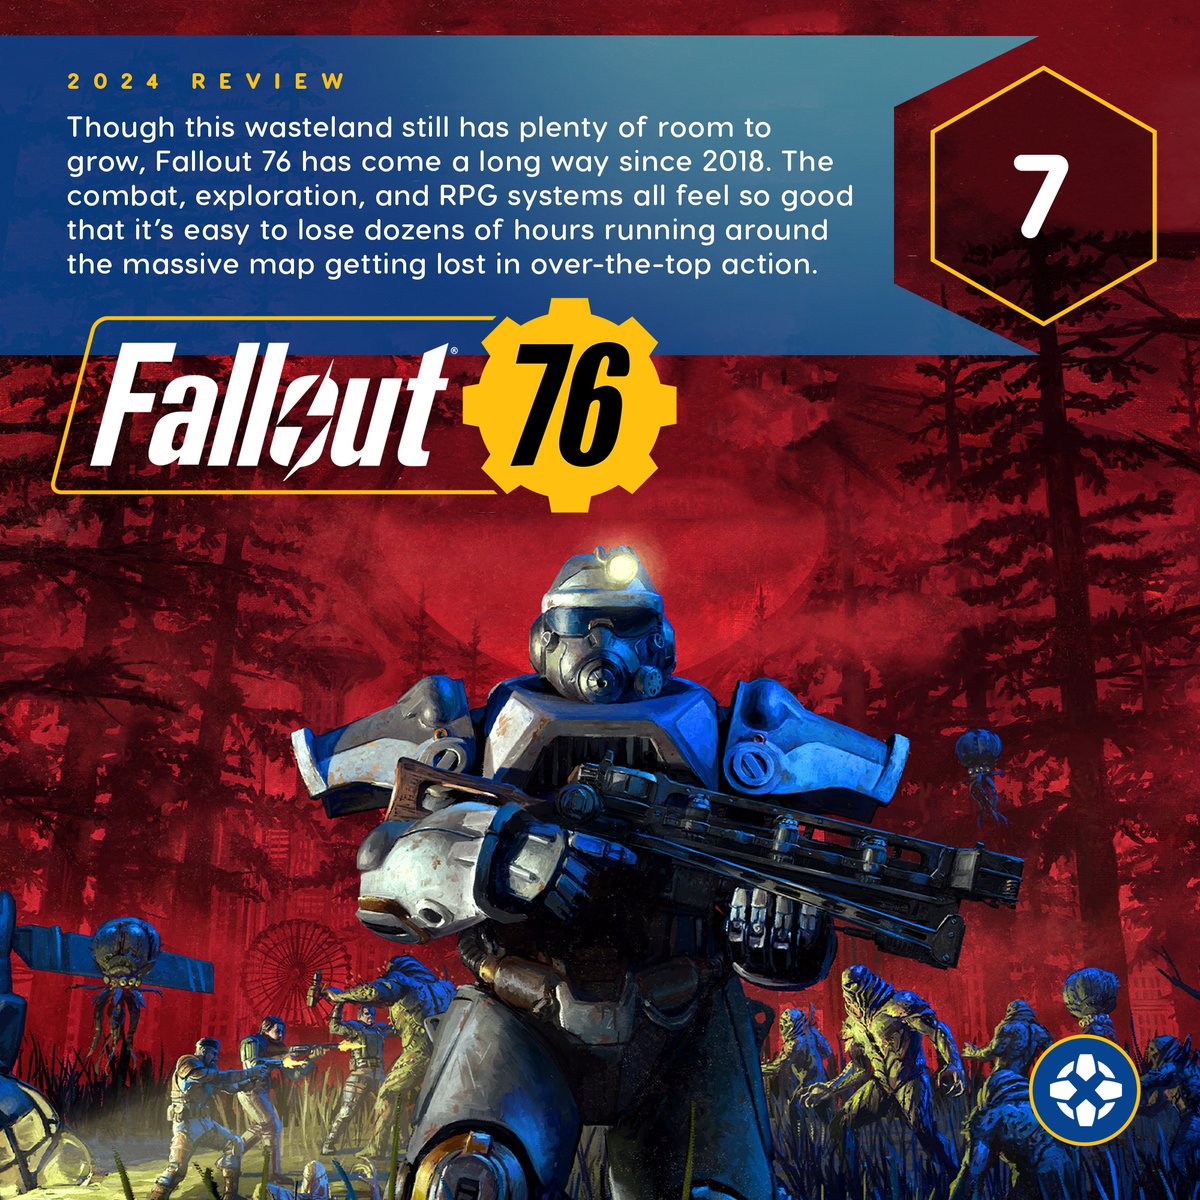 In 2024, Fallout 76 finally captures a lot of the post-nuclear experience I love. It trades roleplaying decision-making for multiplayer shooter antics, but still needs more endgame content and a fair inventory solution, writes Travis Northup.

Our review: bit.ly/4b7Ap0D